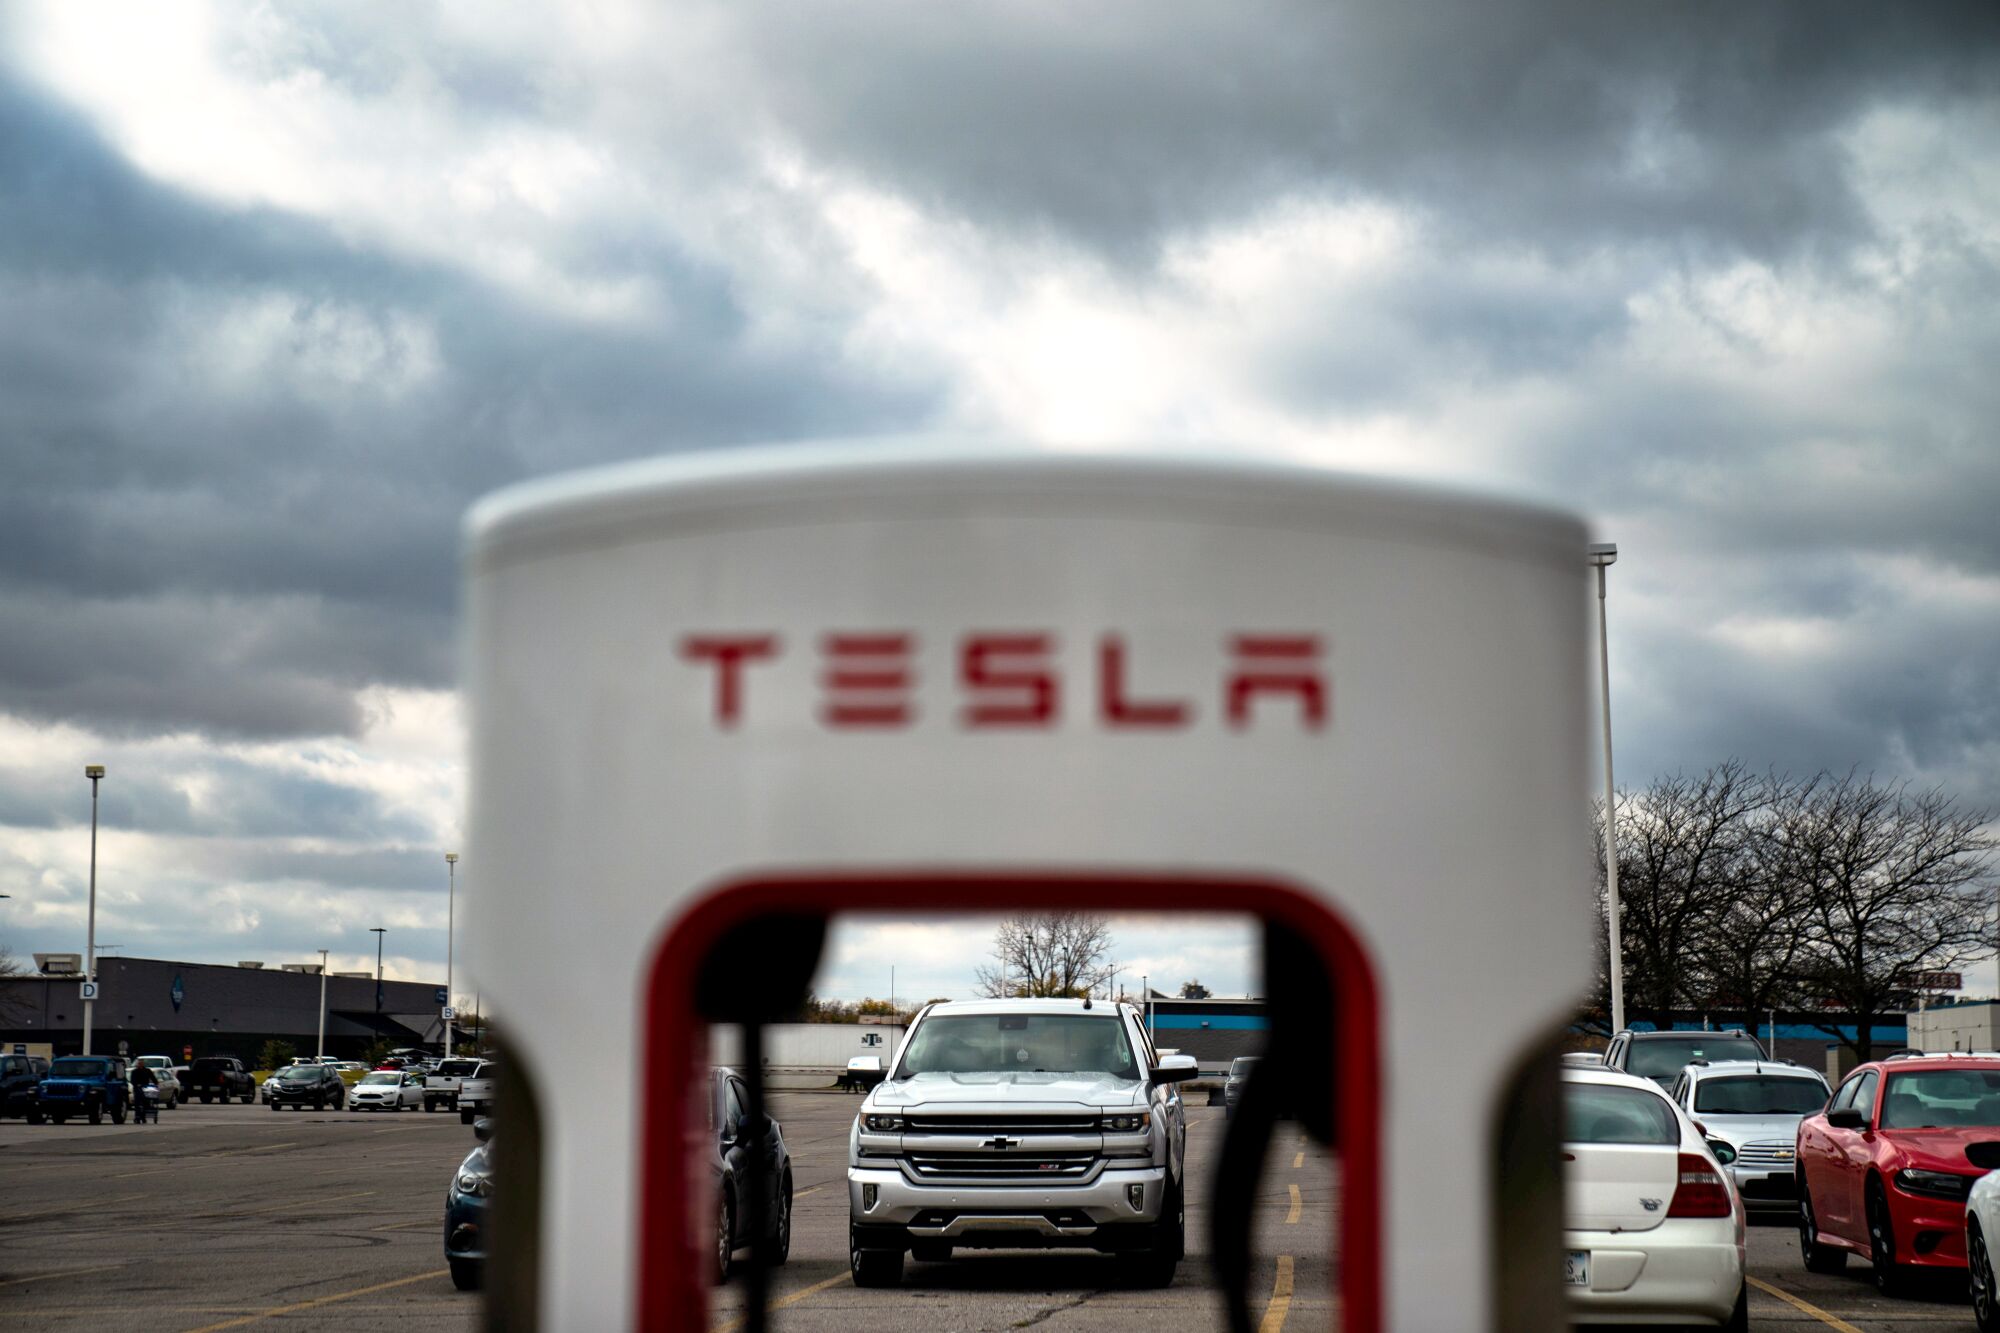 A white structure with the word Tesla, in red, with cars in the background against cloudy skies